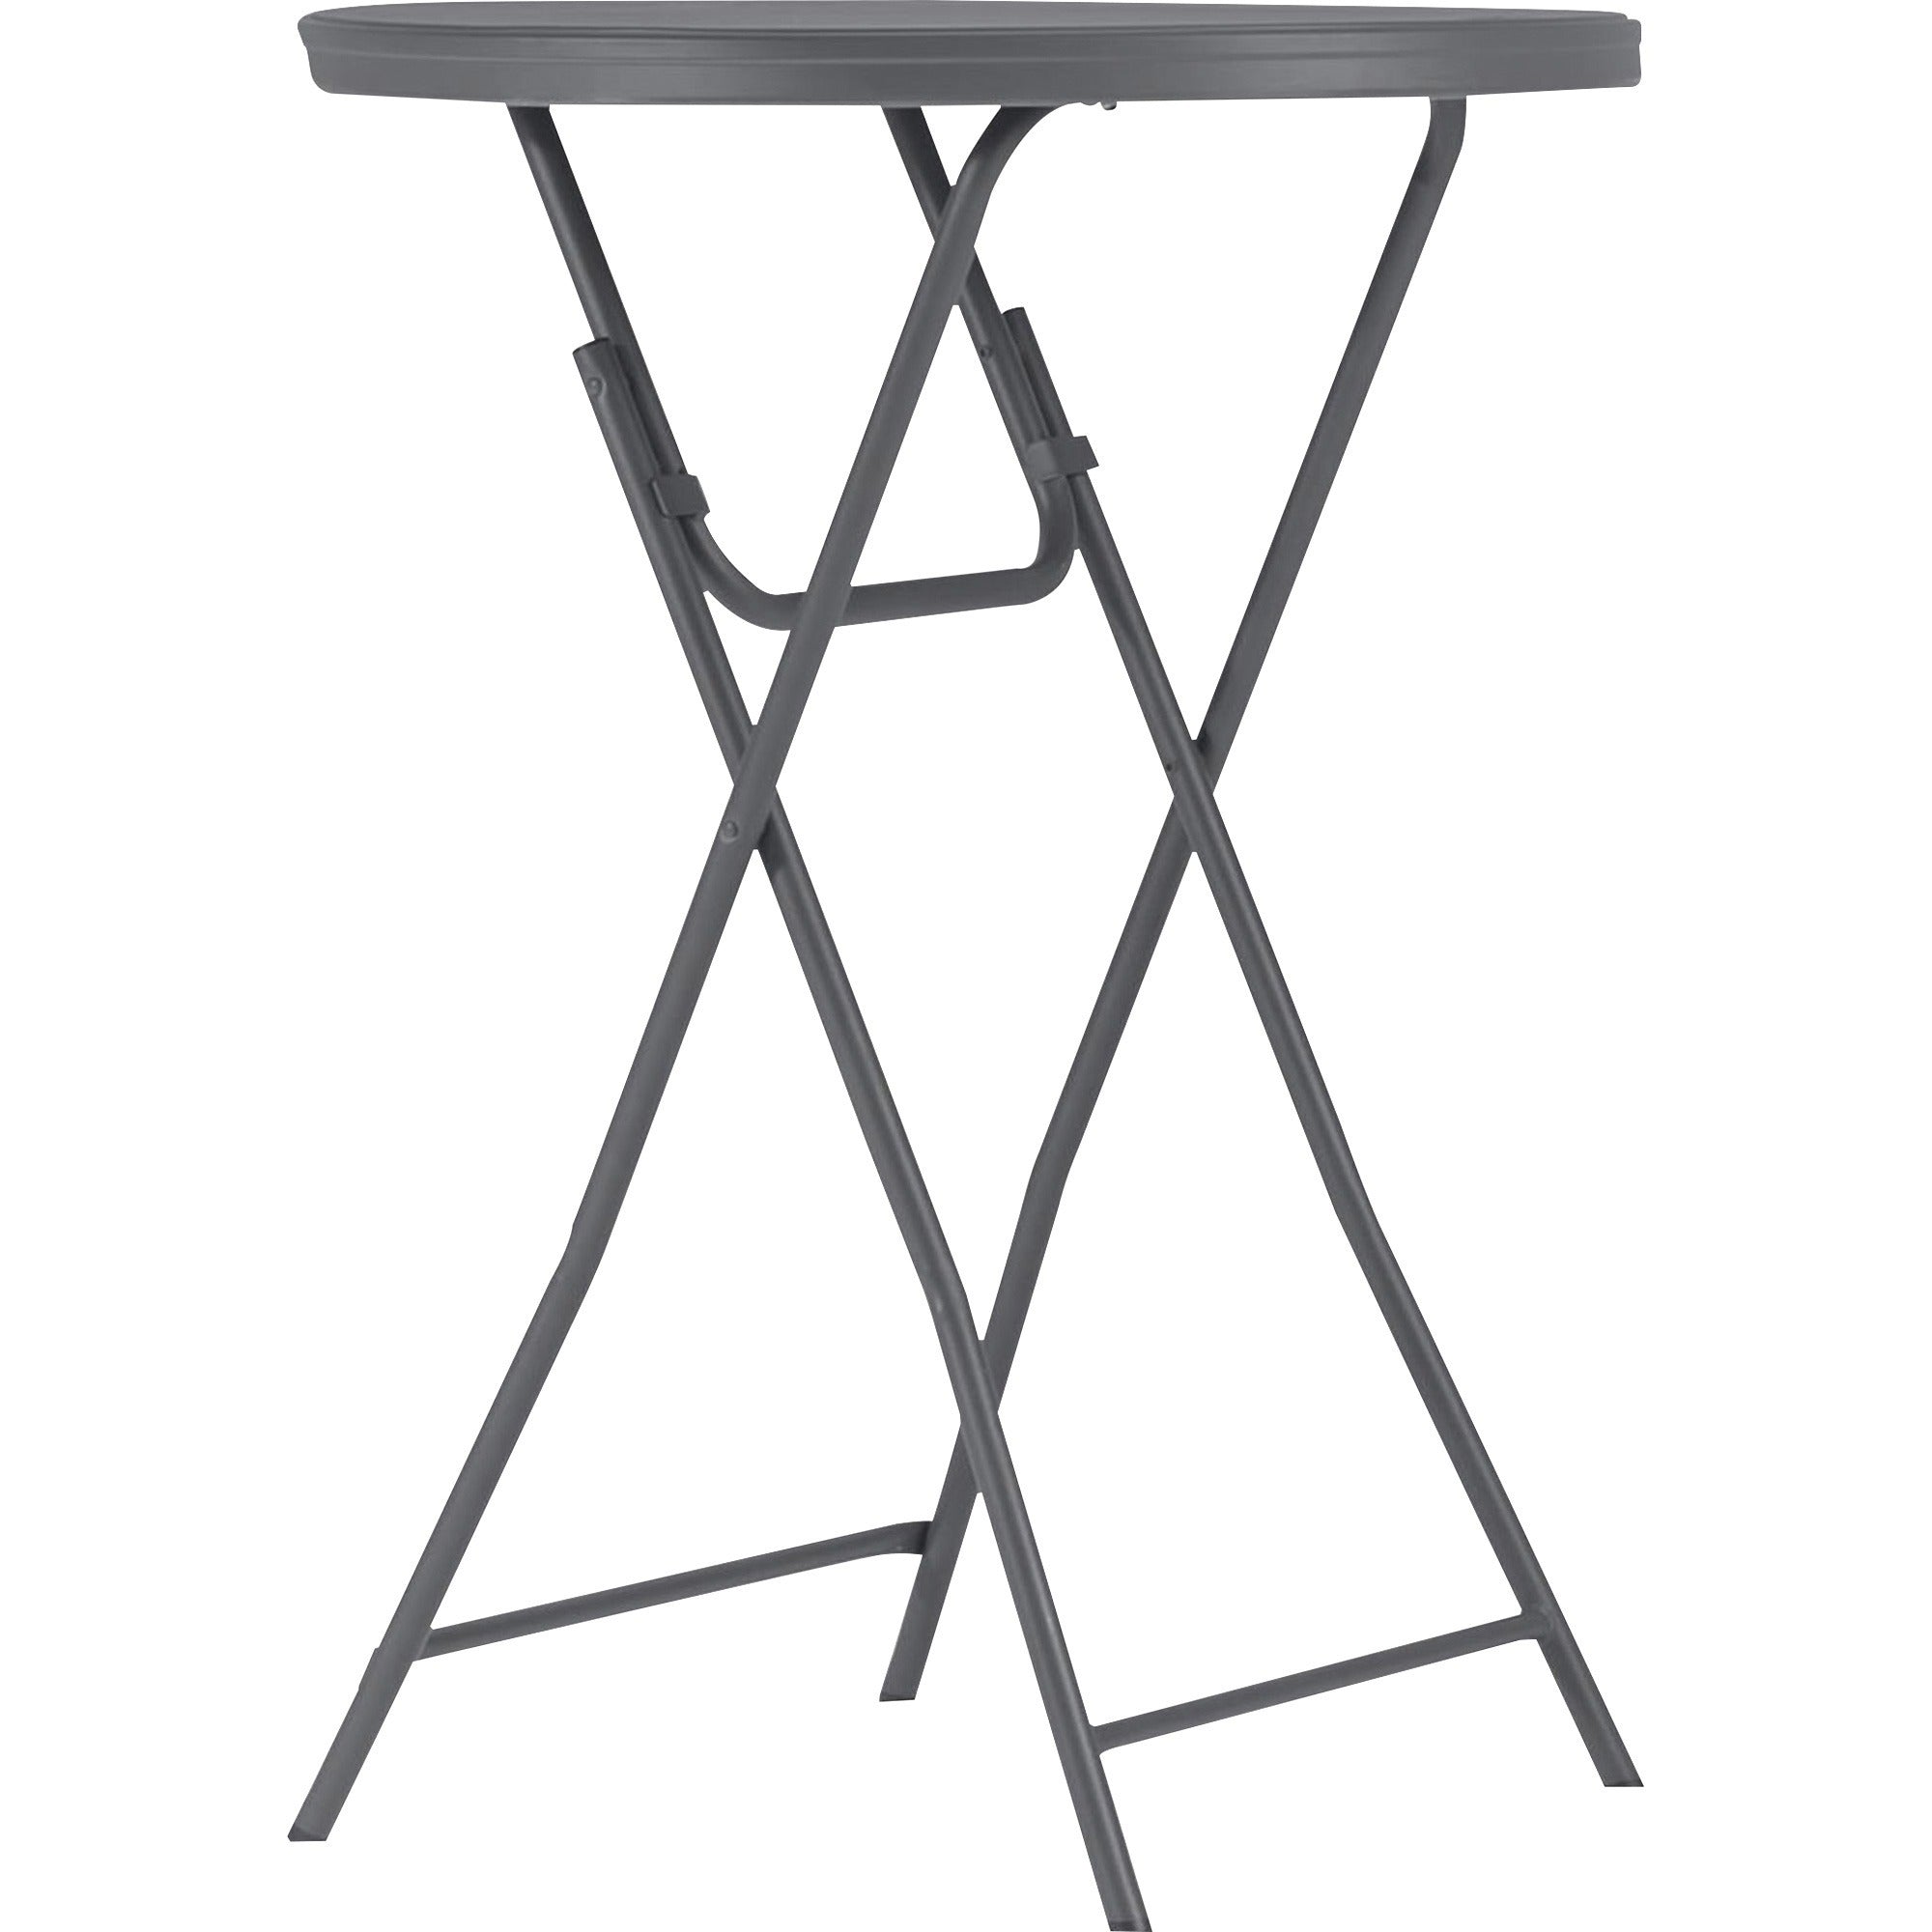 Dorel Zown Commercial Cocktail Folding Table - For - Table TopRound Top - Four Leg Base - 4 Legs - 350 lb Capacity x 32" Table Top Diameter - 43.62" Height - Gray - High-density Polyethylene (HDPE), Resin - 1 Each - 1